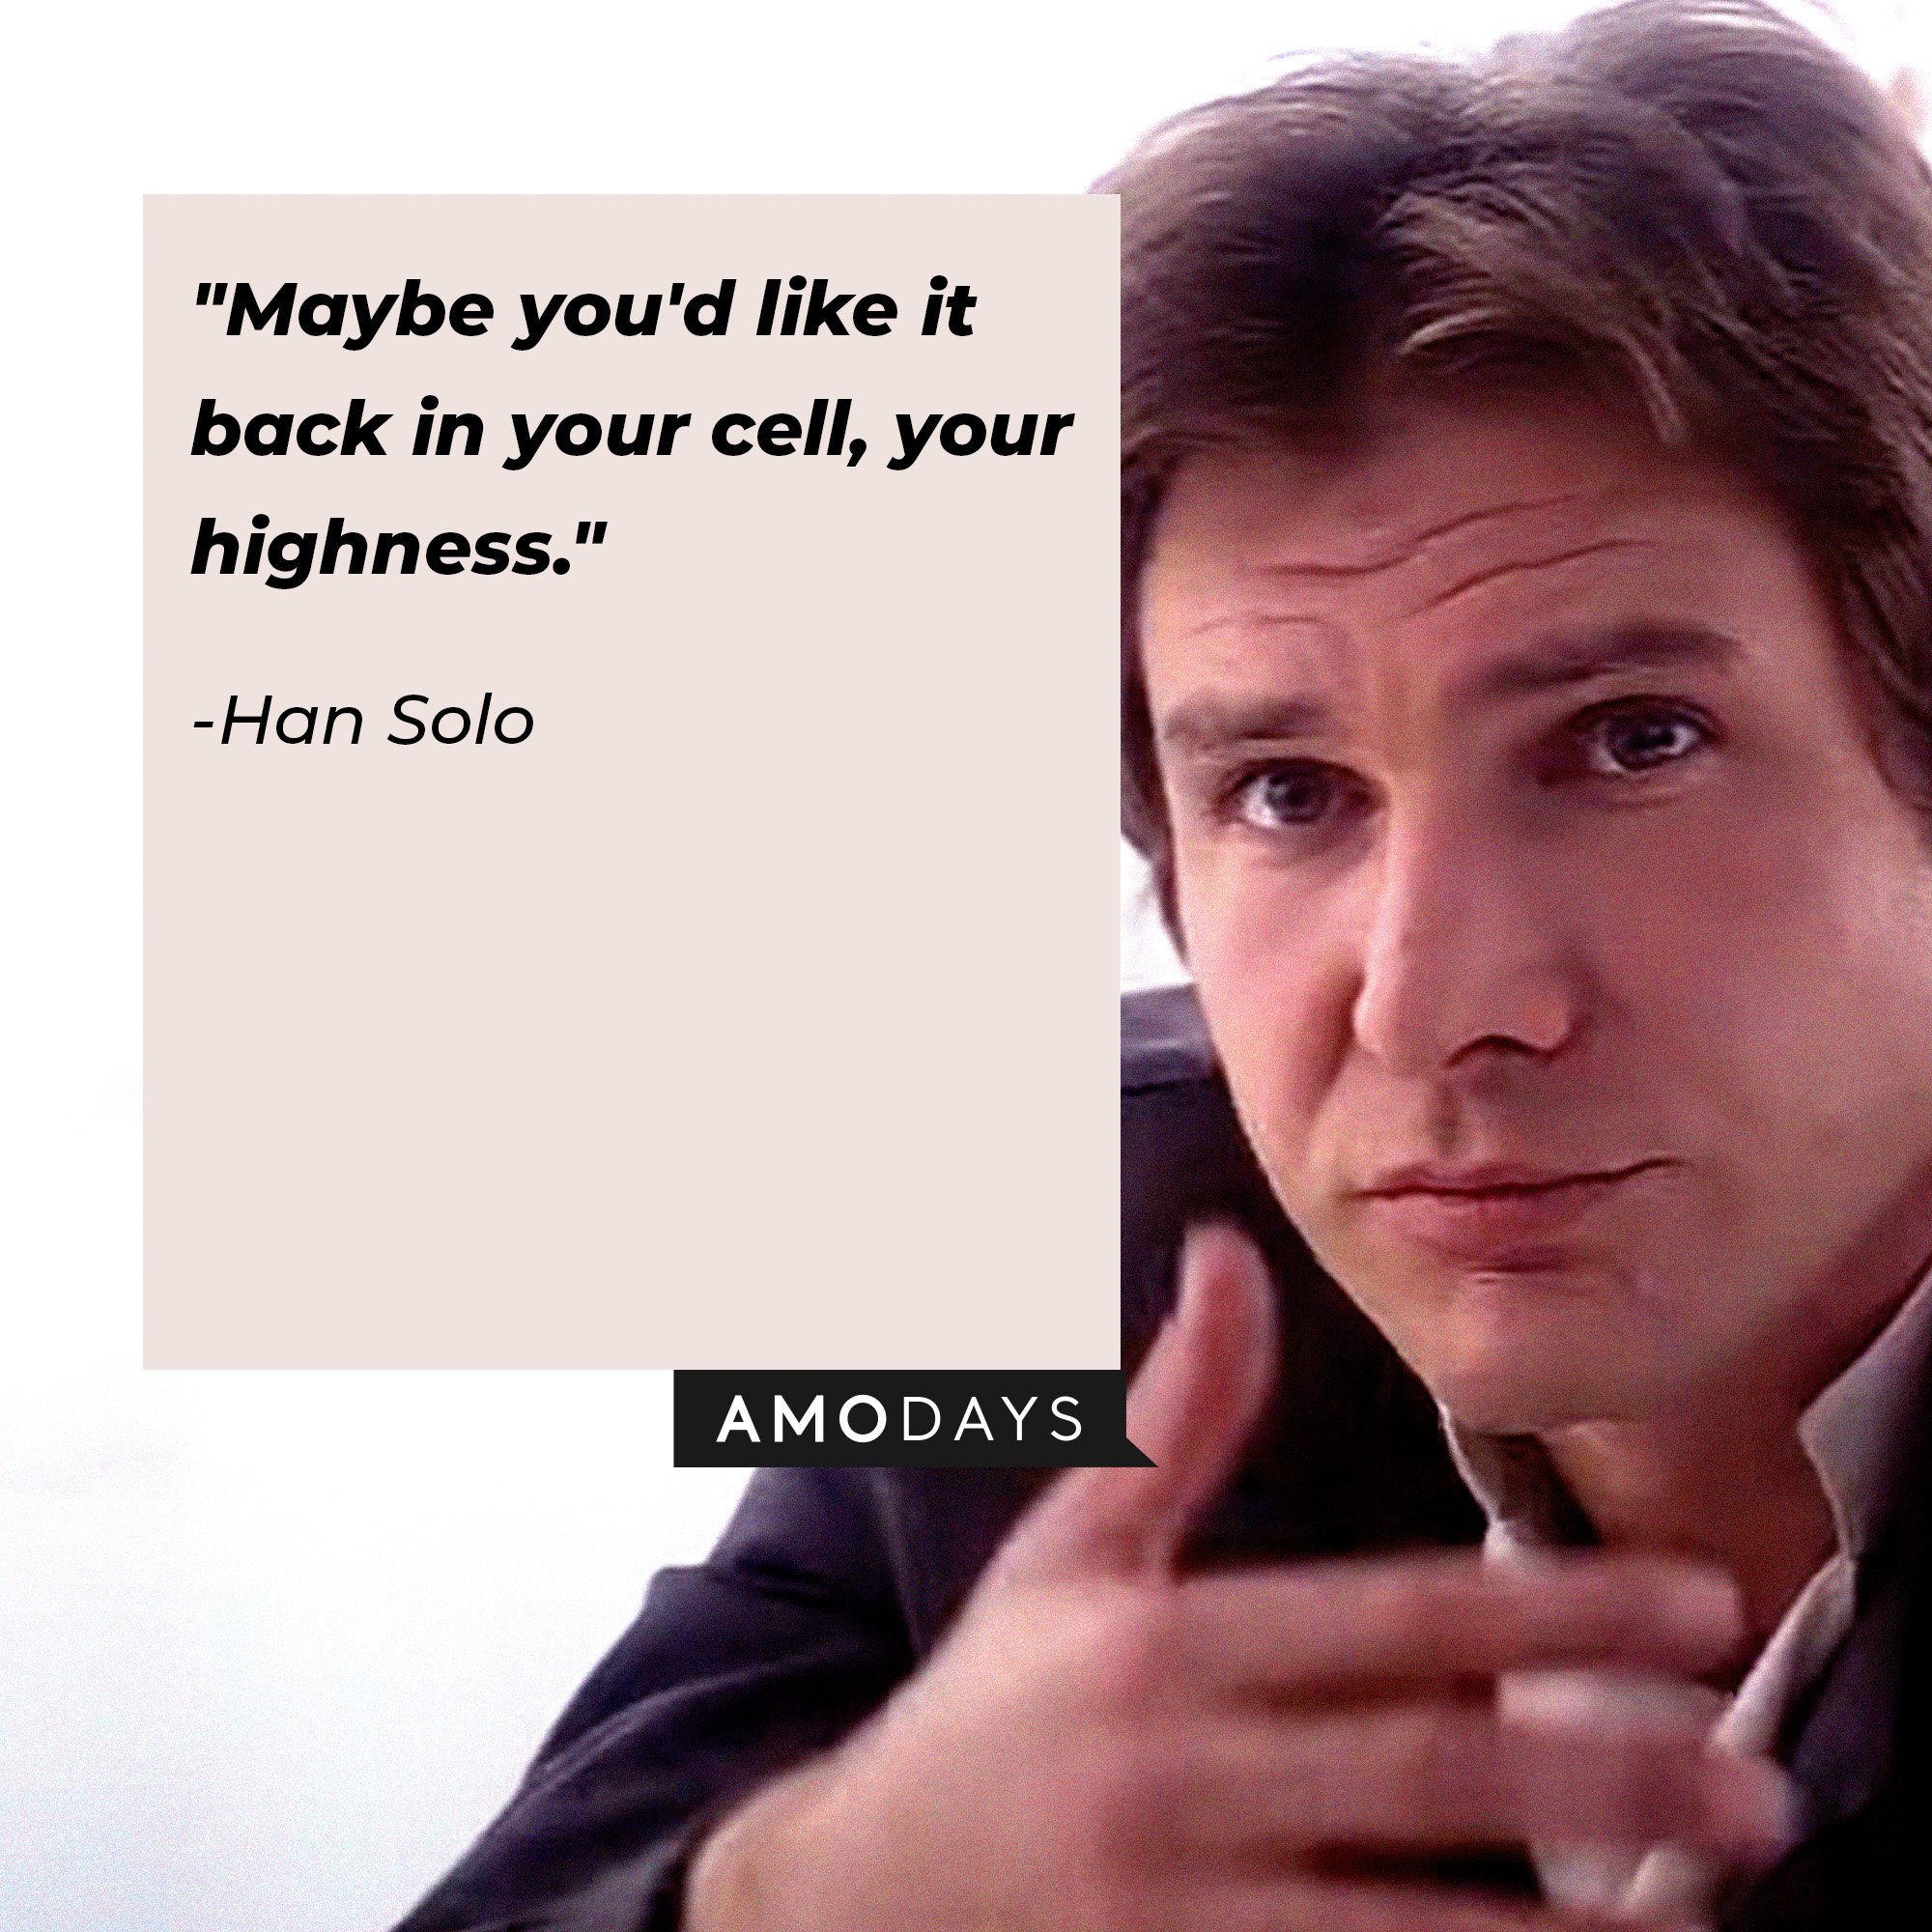 Han Solo’s quote: "Maybe you'd like it back in your cell, your highness." | Image: AmoDays